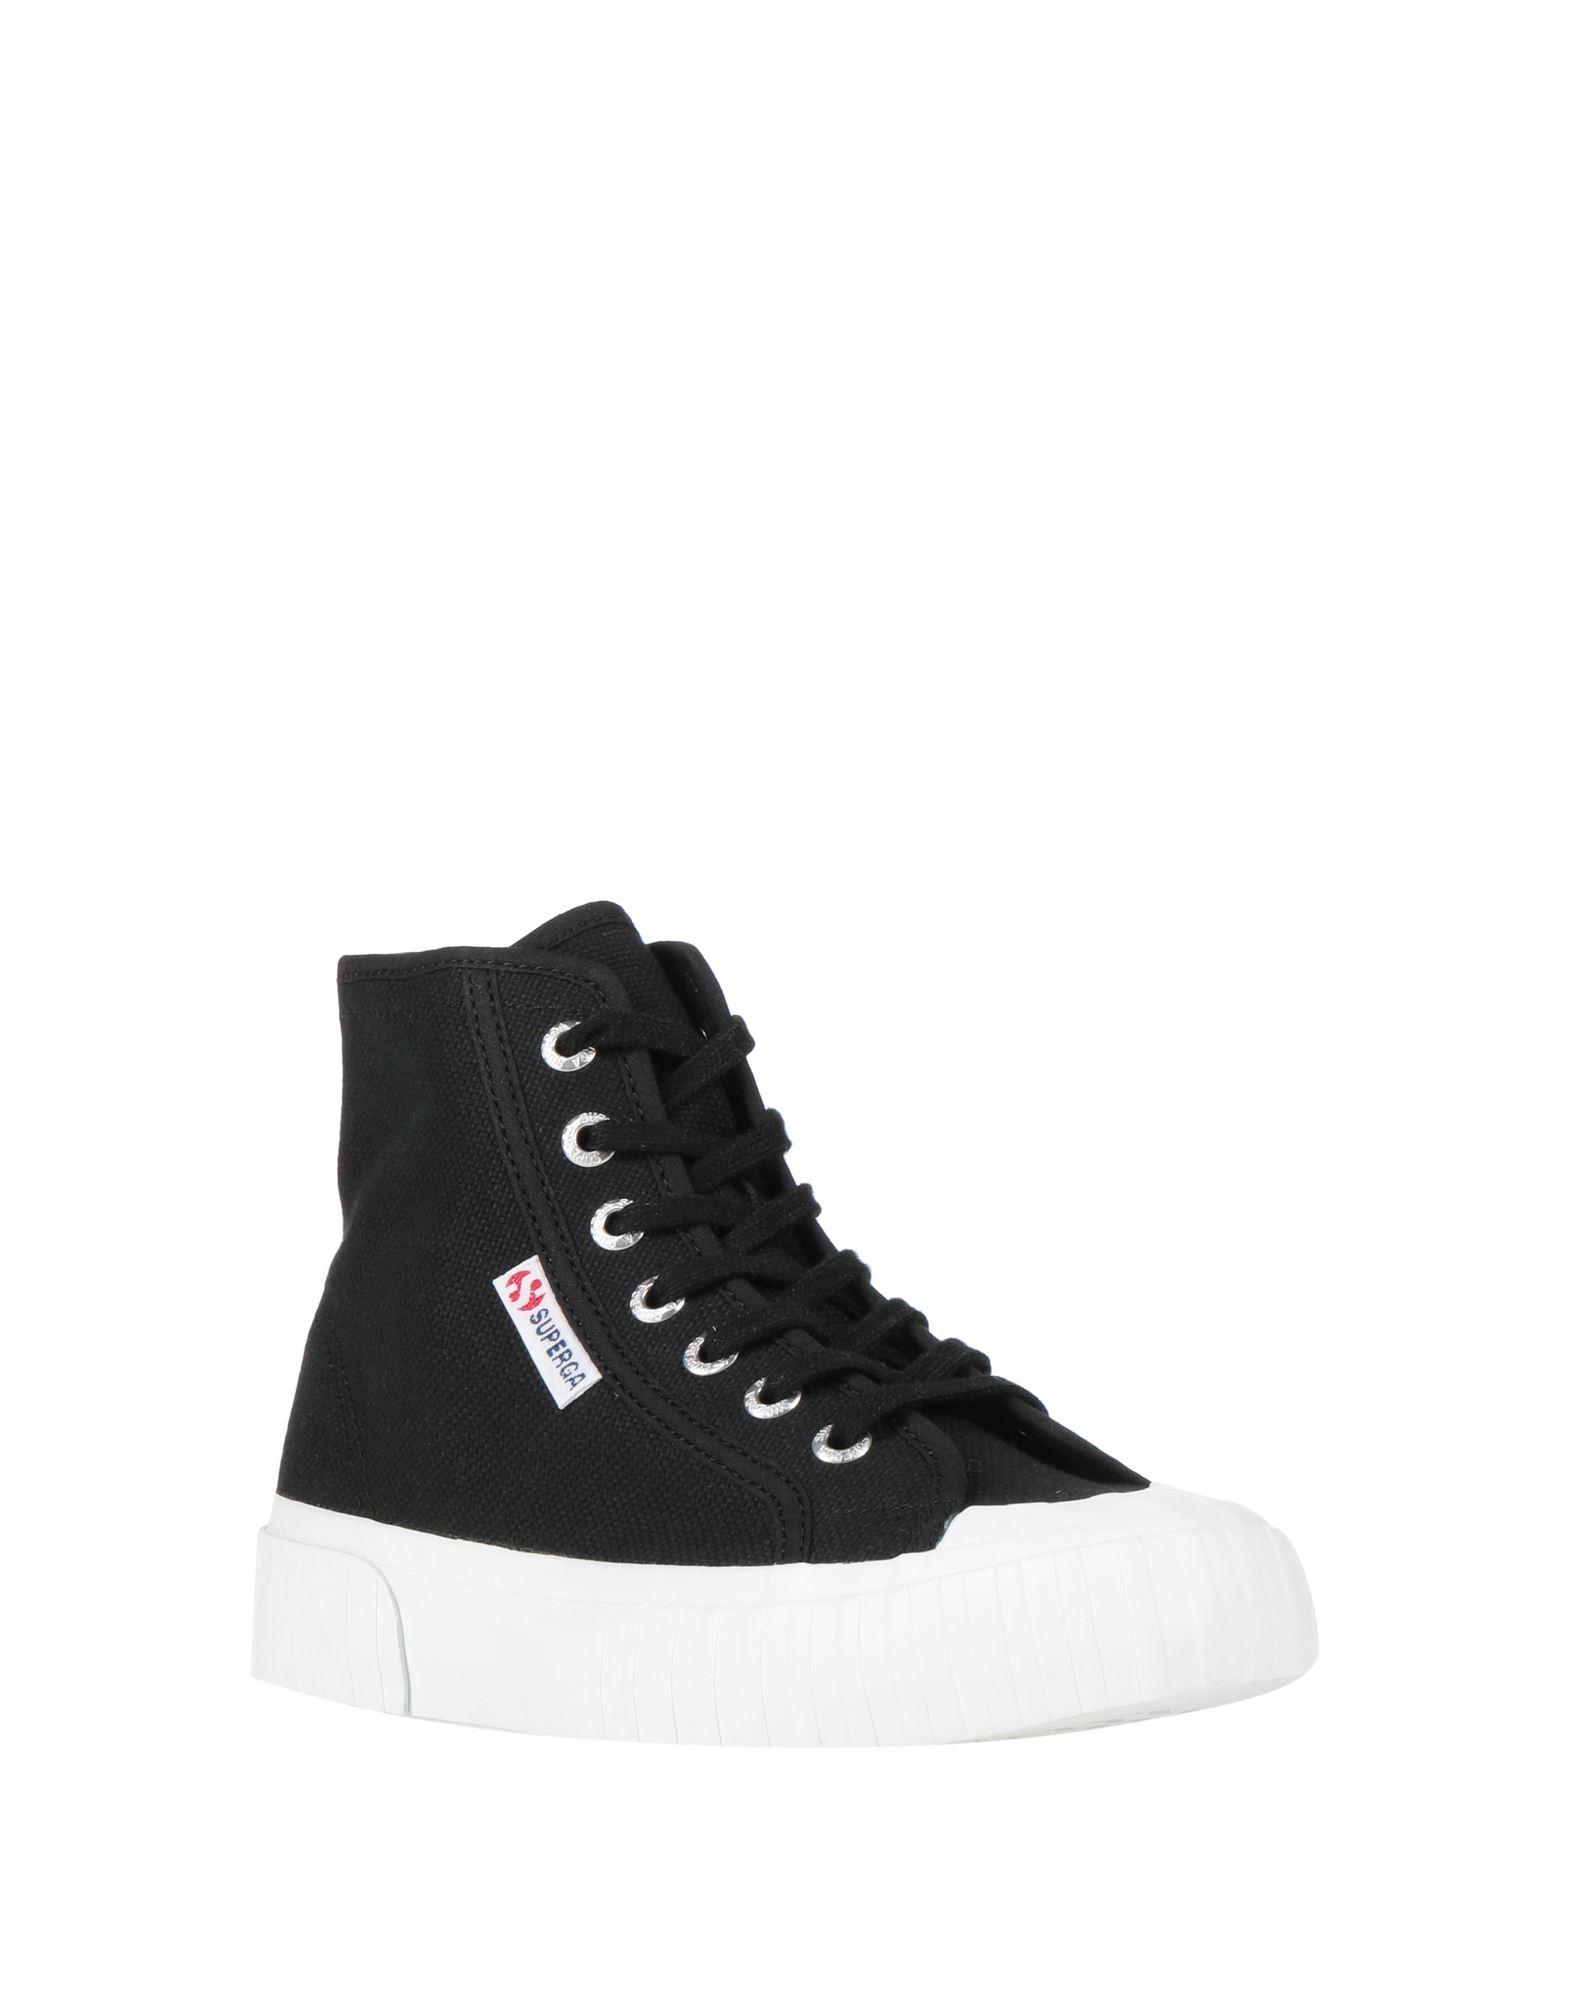 Superga Canvas Trainers in Black | Lyst